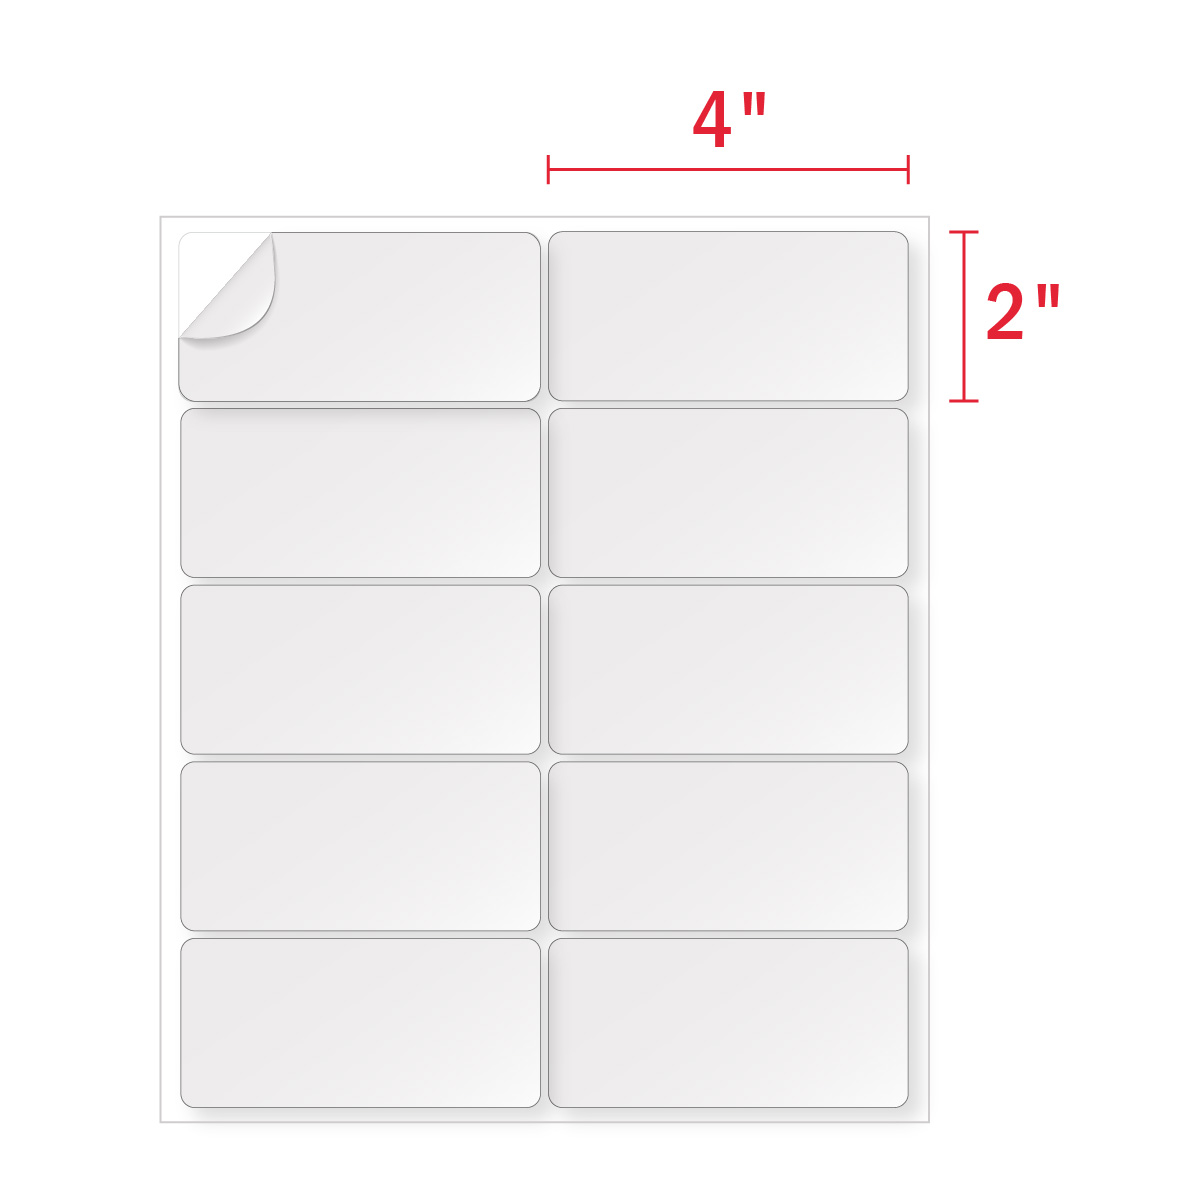 20x20 Labels - 20 Labels Per Sheet - Avery ® 20 Compatible Throughout 2X4 Label Template